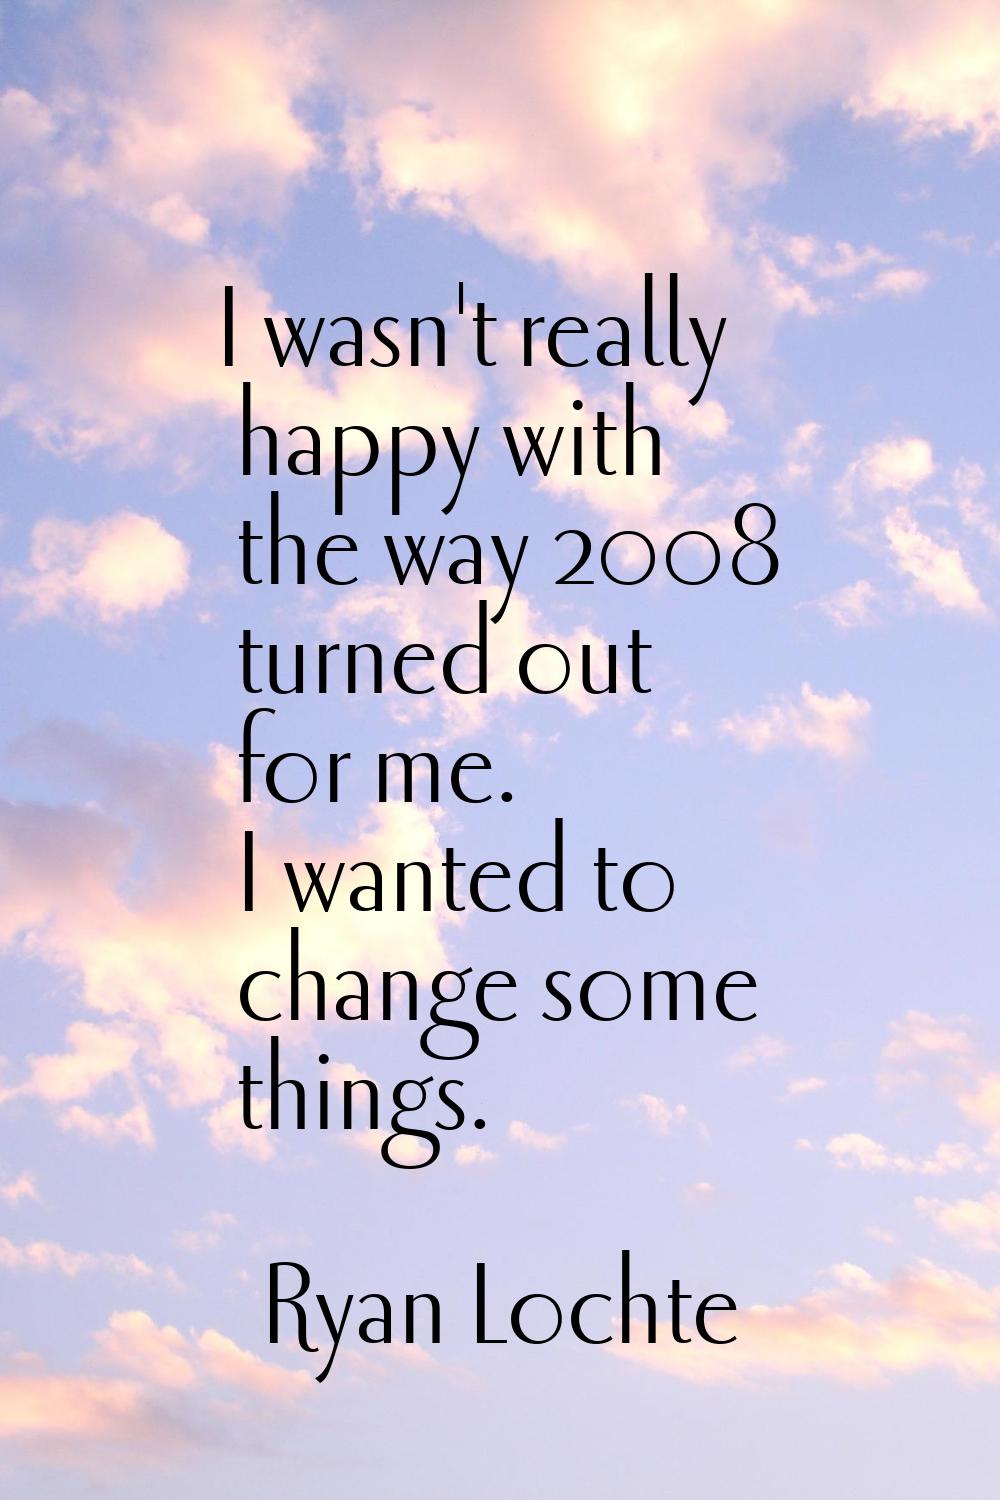 I wasn't really happy with the way 2008 turned out for me. I wanted to change some things.